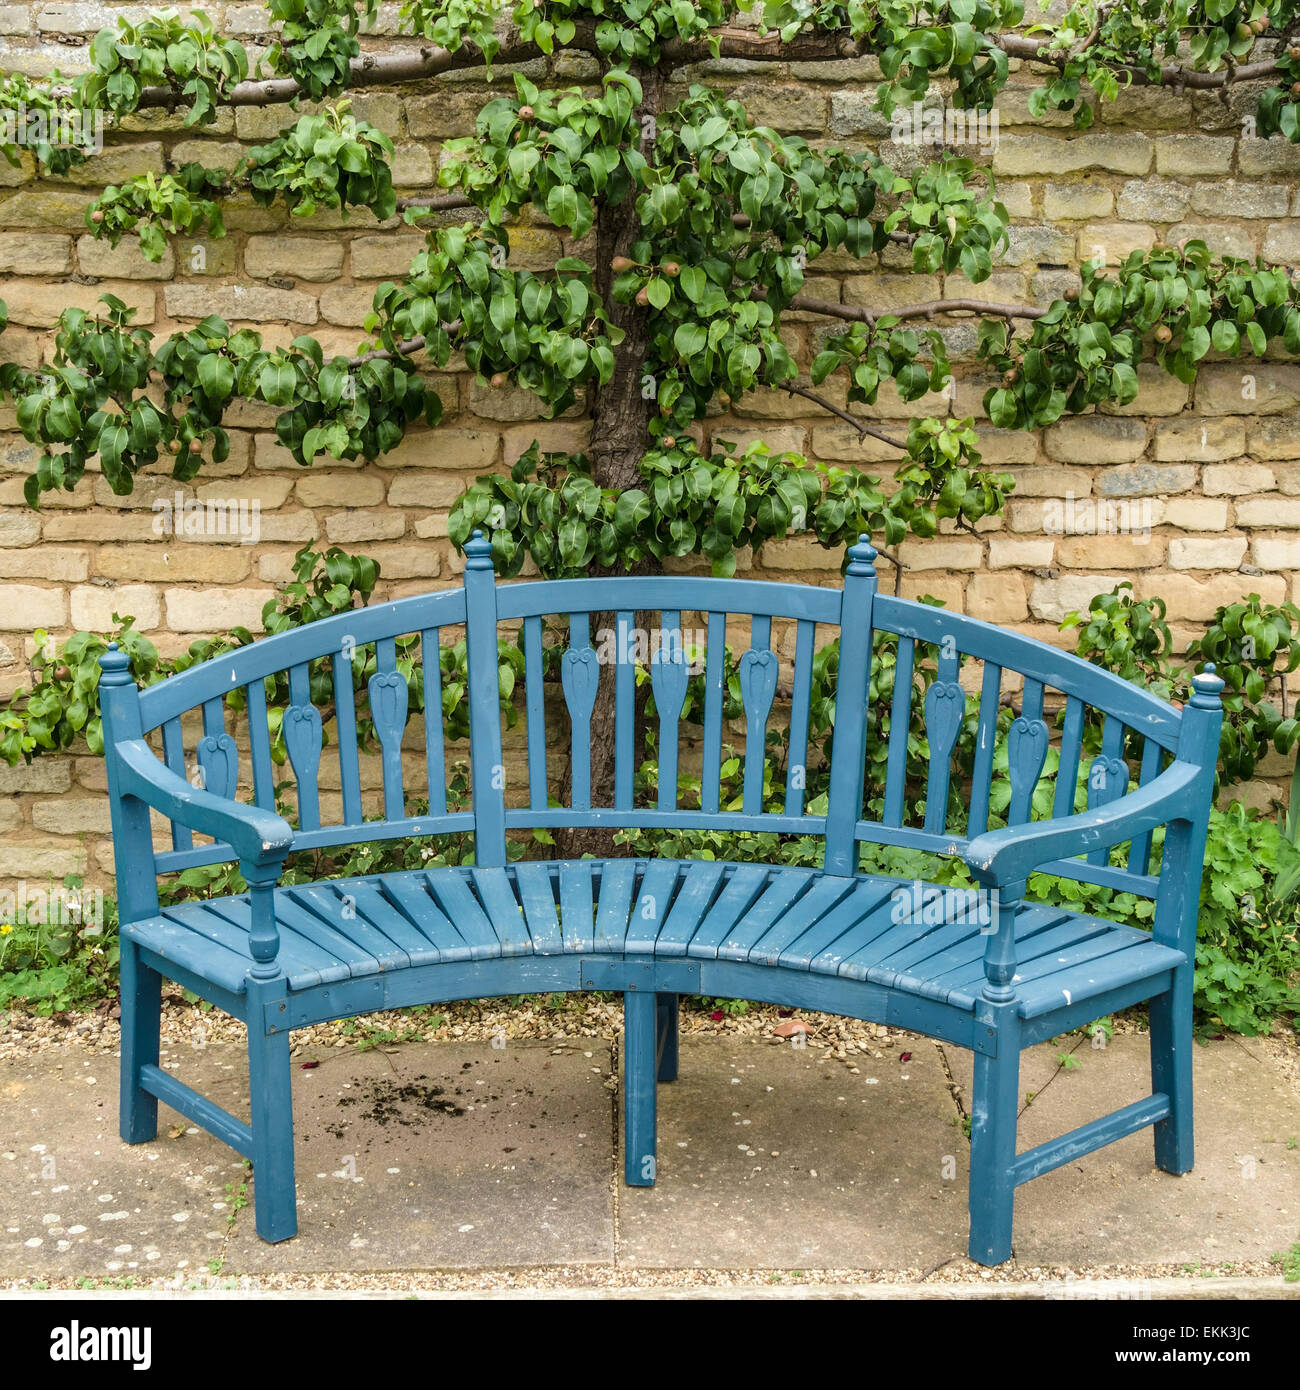 Blue wooden garden bench seat in front of trained pear tree, Grimsthorpe Castle, Bourne, Lincolnshire, England, UK. Stock Photo